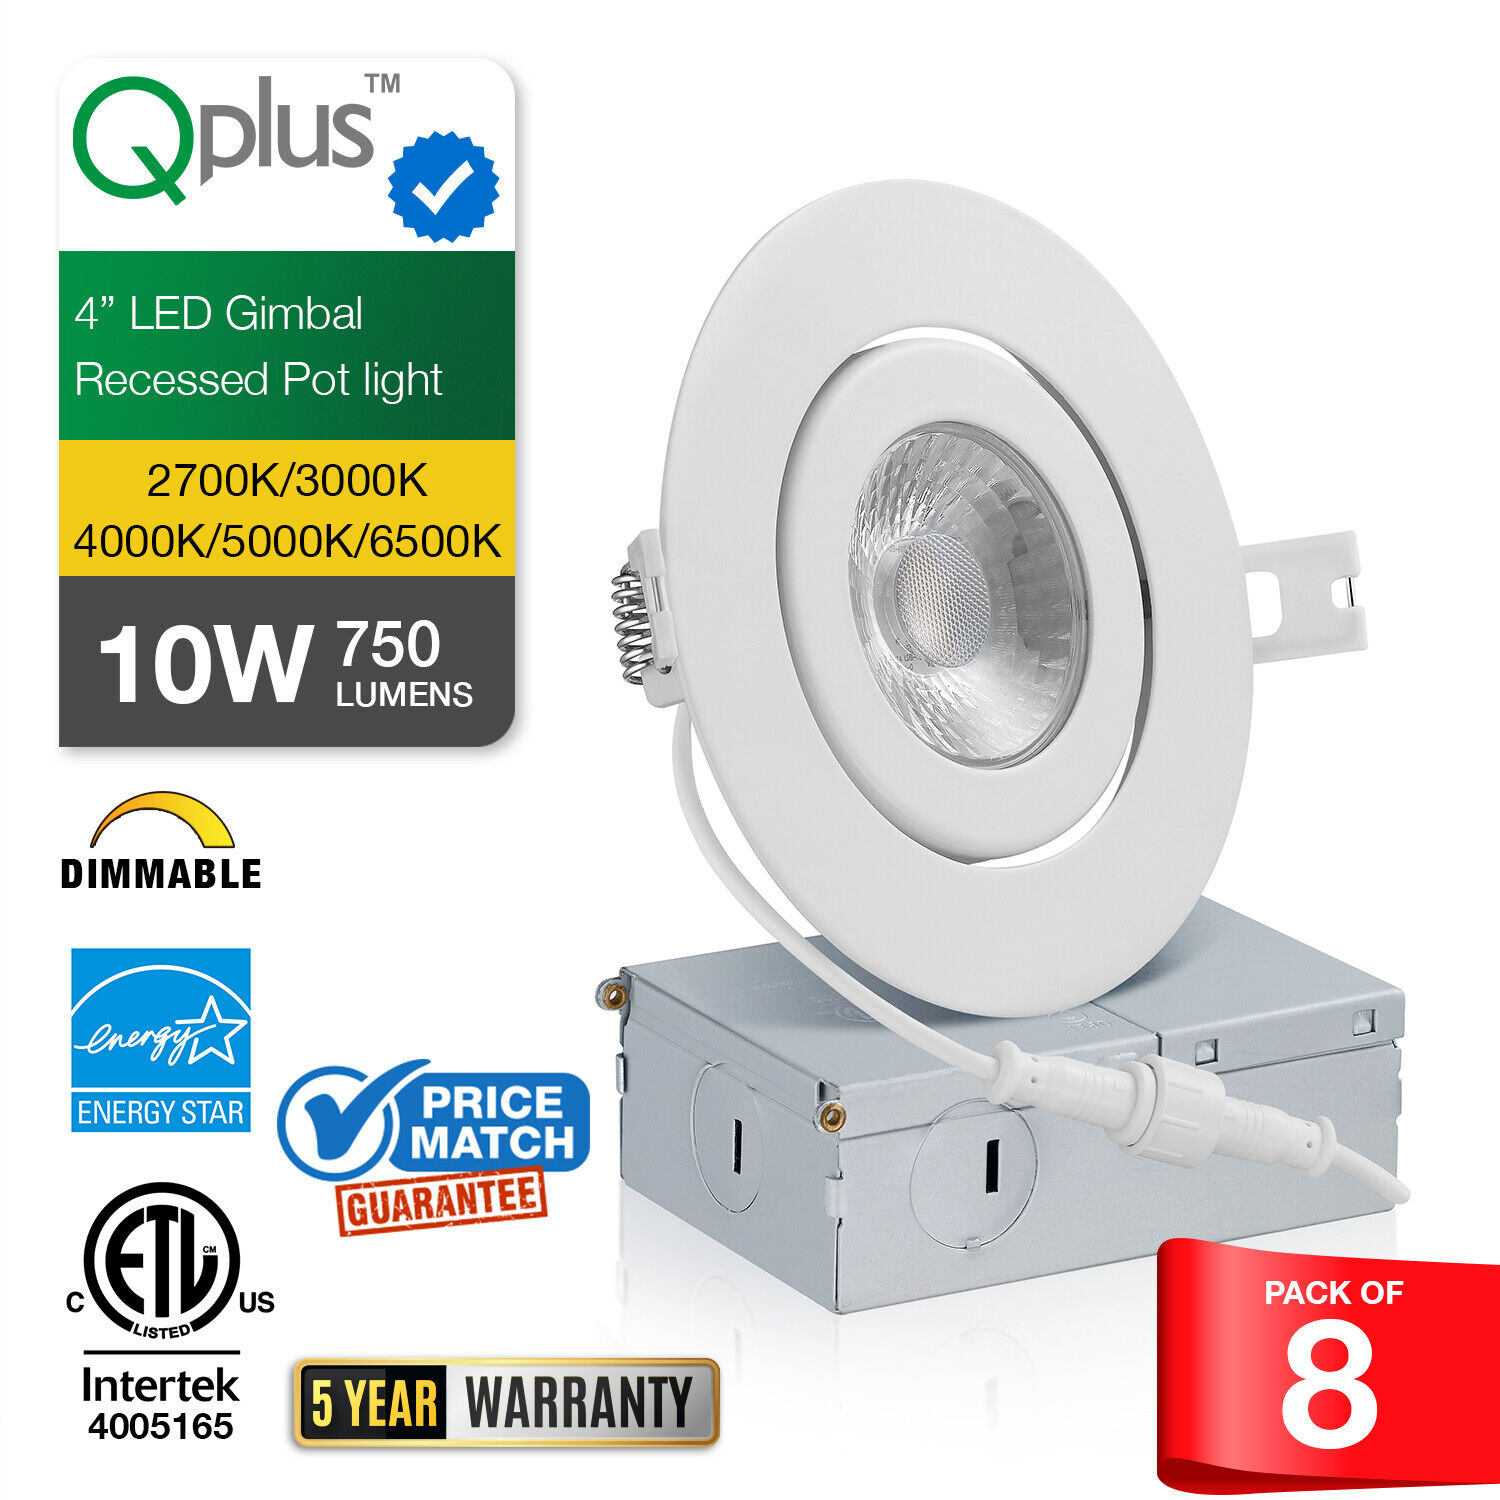 QPLUS Inch Ultra-Thin Adjustable Eyeball Gimbal LED Recessed Lighting  with Junction Box/Canless Downlight, 10 Watts, 750lm, Dimmable, Energy Star  and ETL Listed (5000K Daylight, Pack)